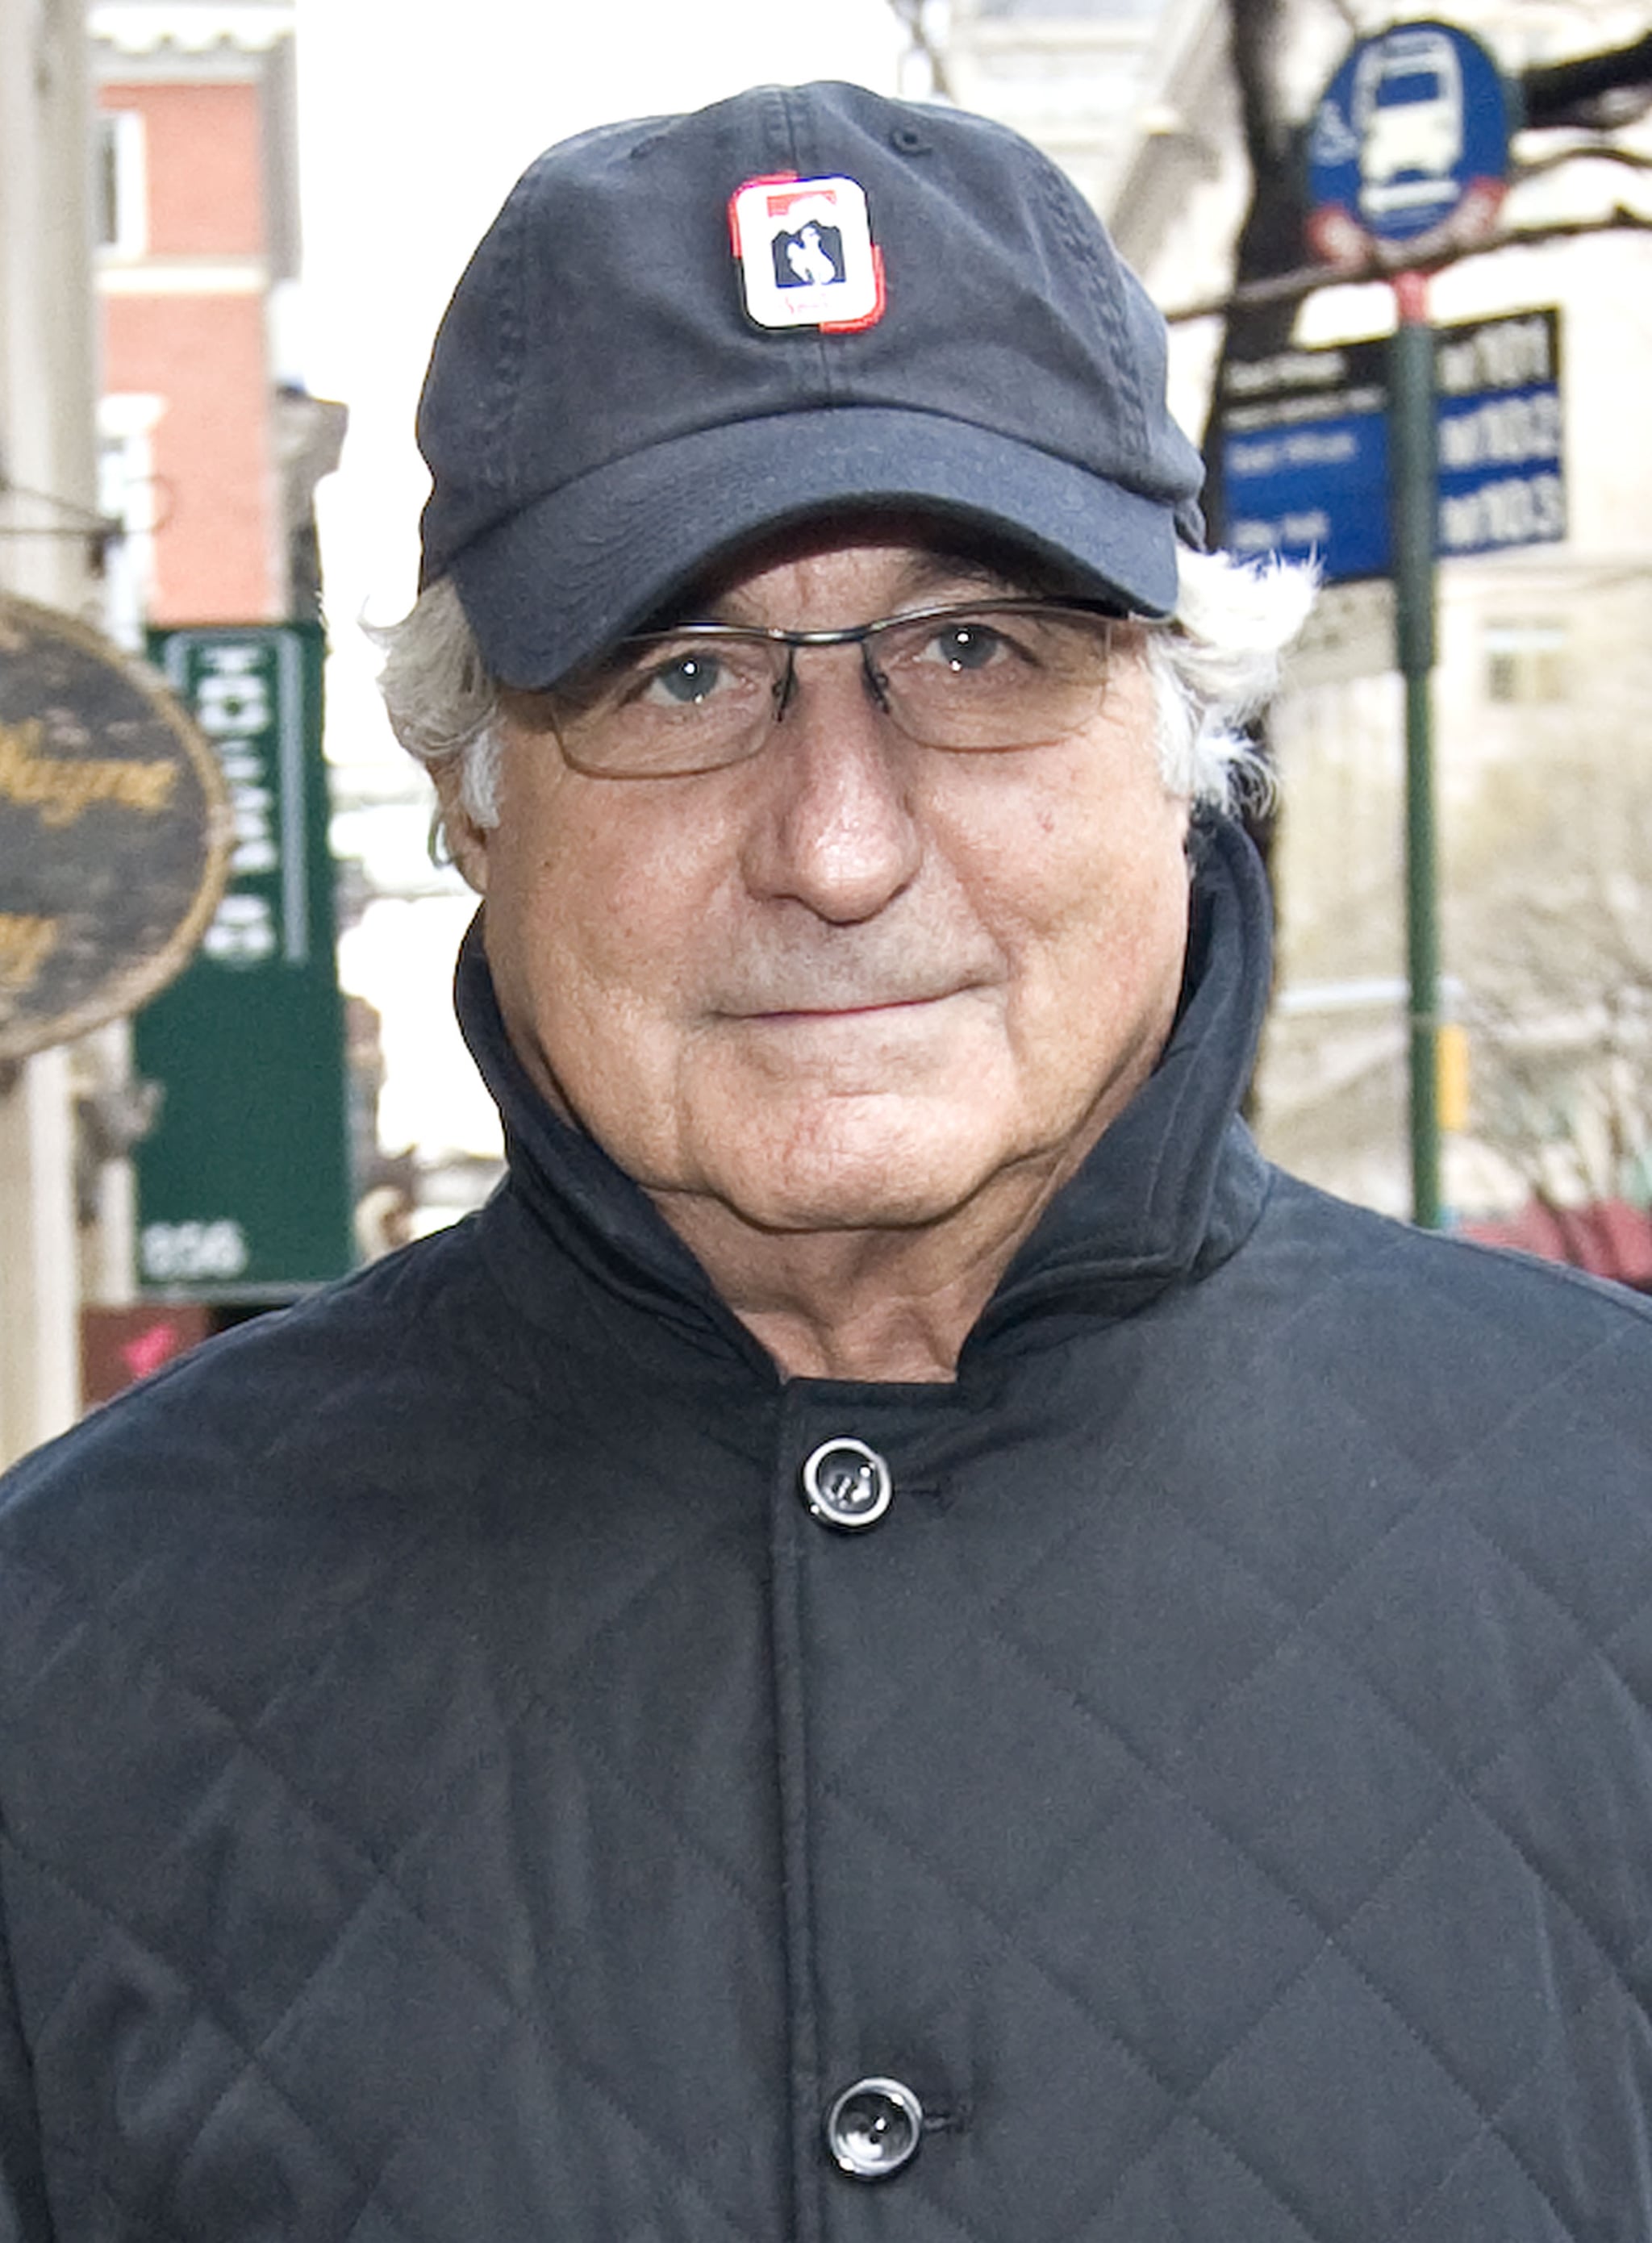 UNITED STATES - DECEMBER 17:  Bernard Madoff, money manager and accused mastermind of a $50 billion investment fraud, walks towards his home along Lexington Avenue after appearing in court in New York, U.S., on Wednesday, Dec. 17, 2008. Individual investors who lost money in Madoff's alleged $50 billion fraud may be able to recover some of their money by seeking tax refunds.  (Photo by Daniel Acker/Bloomberg via Getty Images)